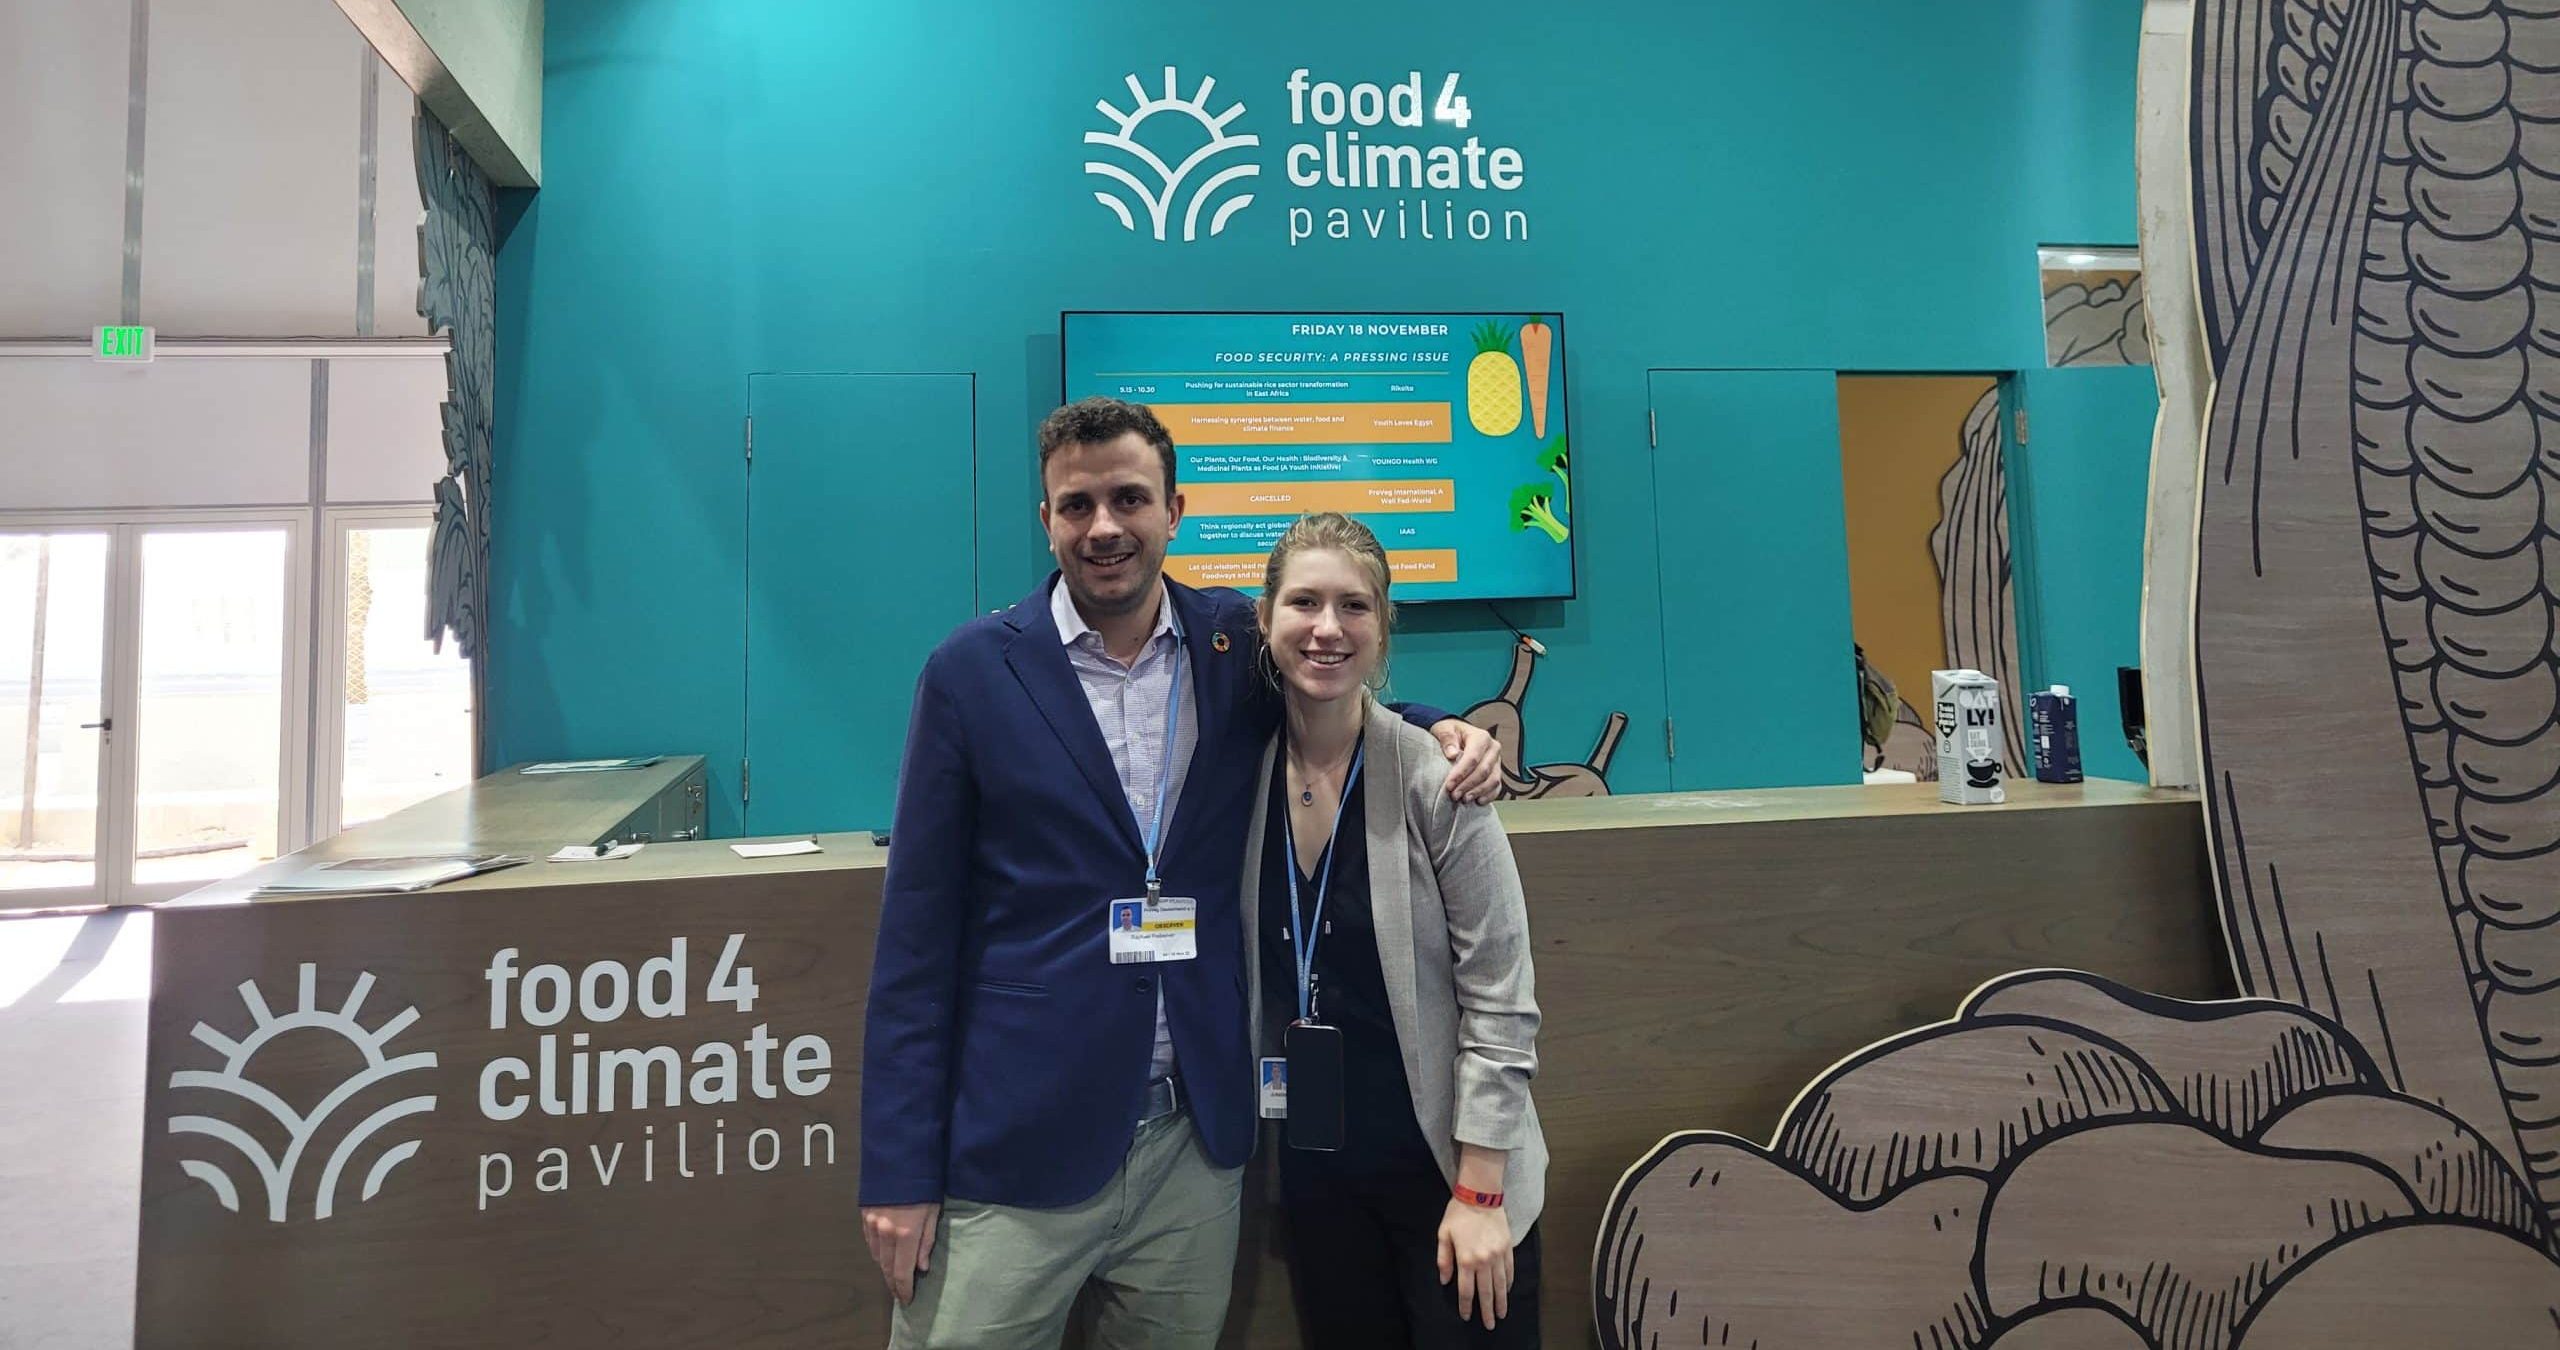 Raphael Podselver and Juliette Tronchon standing in front of the food4climate pavillion